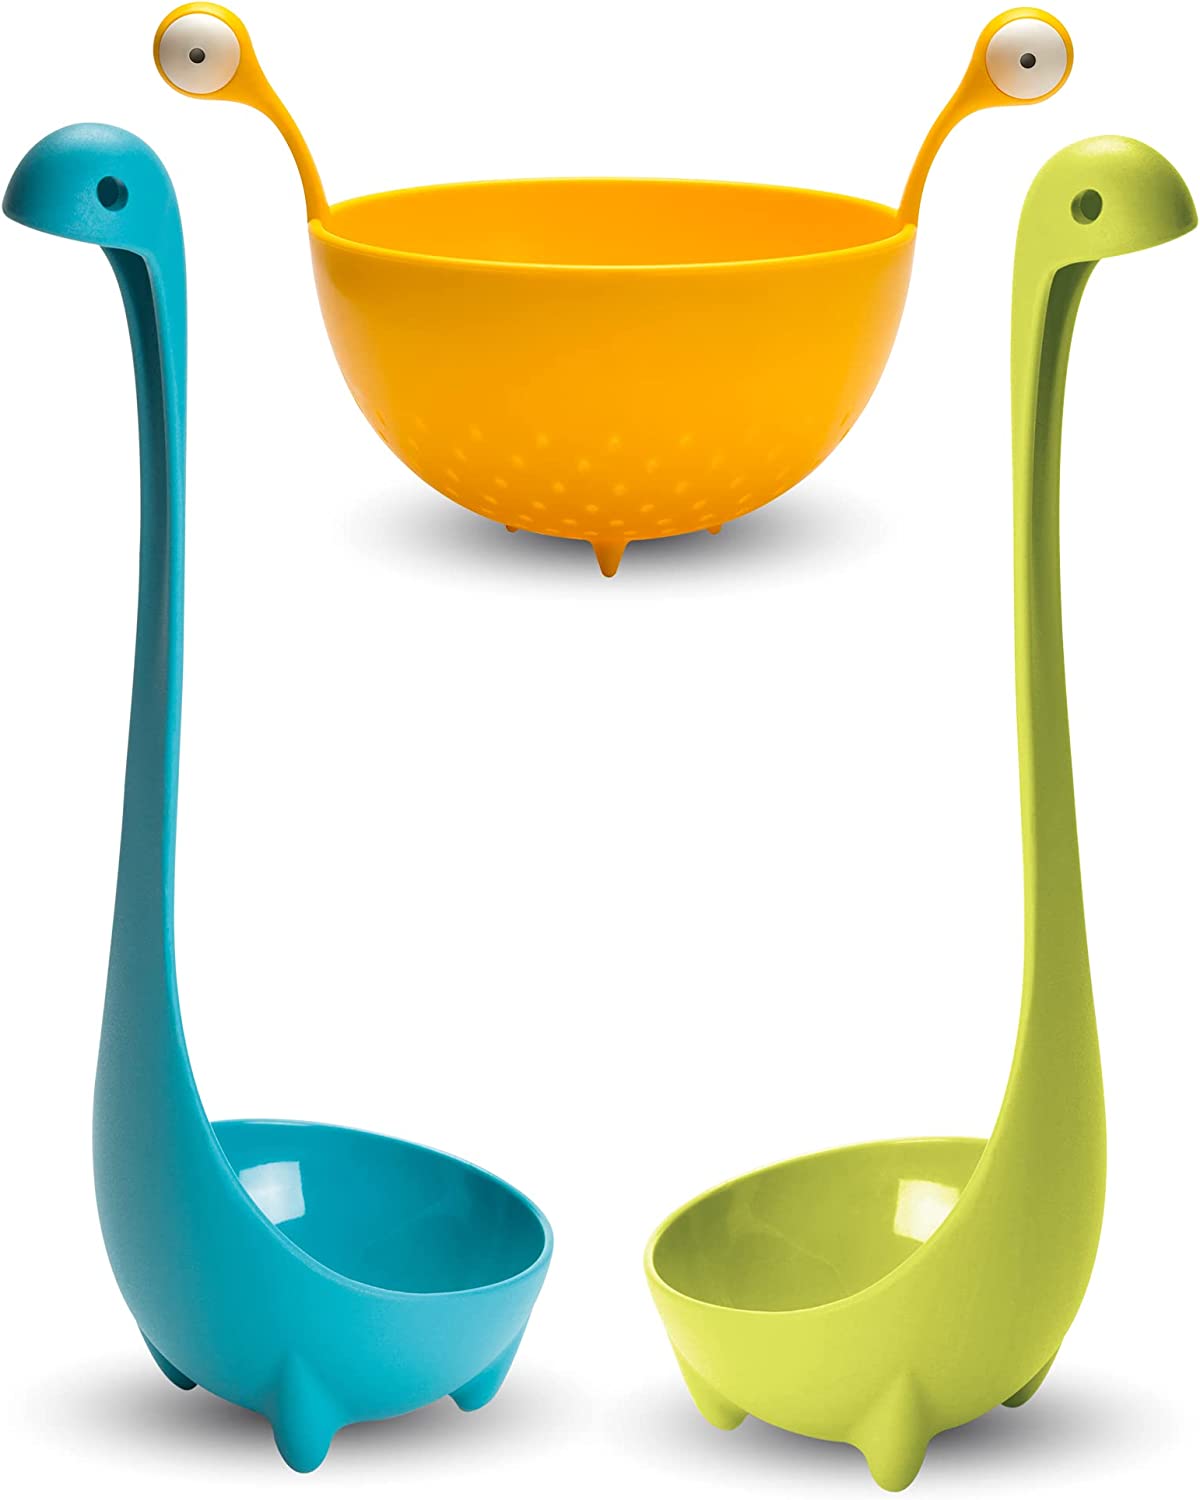 Pack of 3 – Nessie Ladle Spoons (Green, Turquoise) + Spaghetti Monster Kitchen Strainer